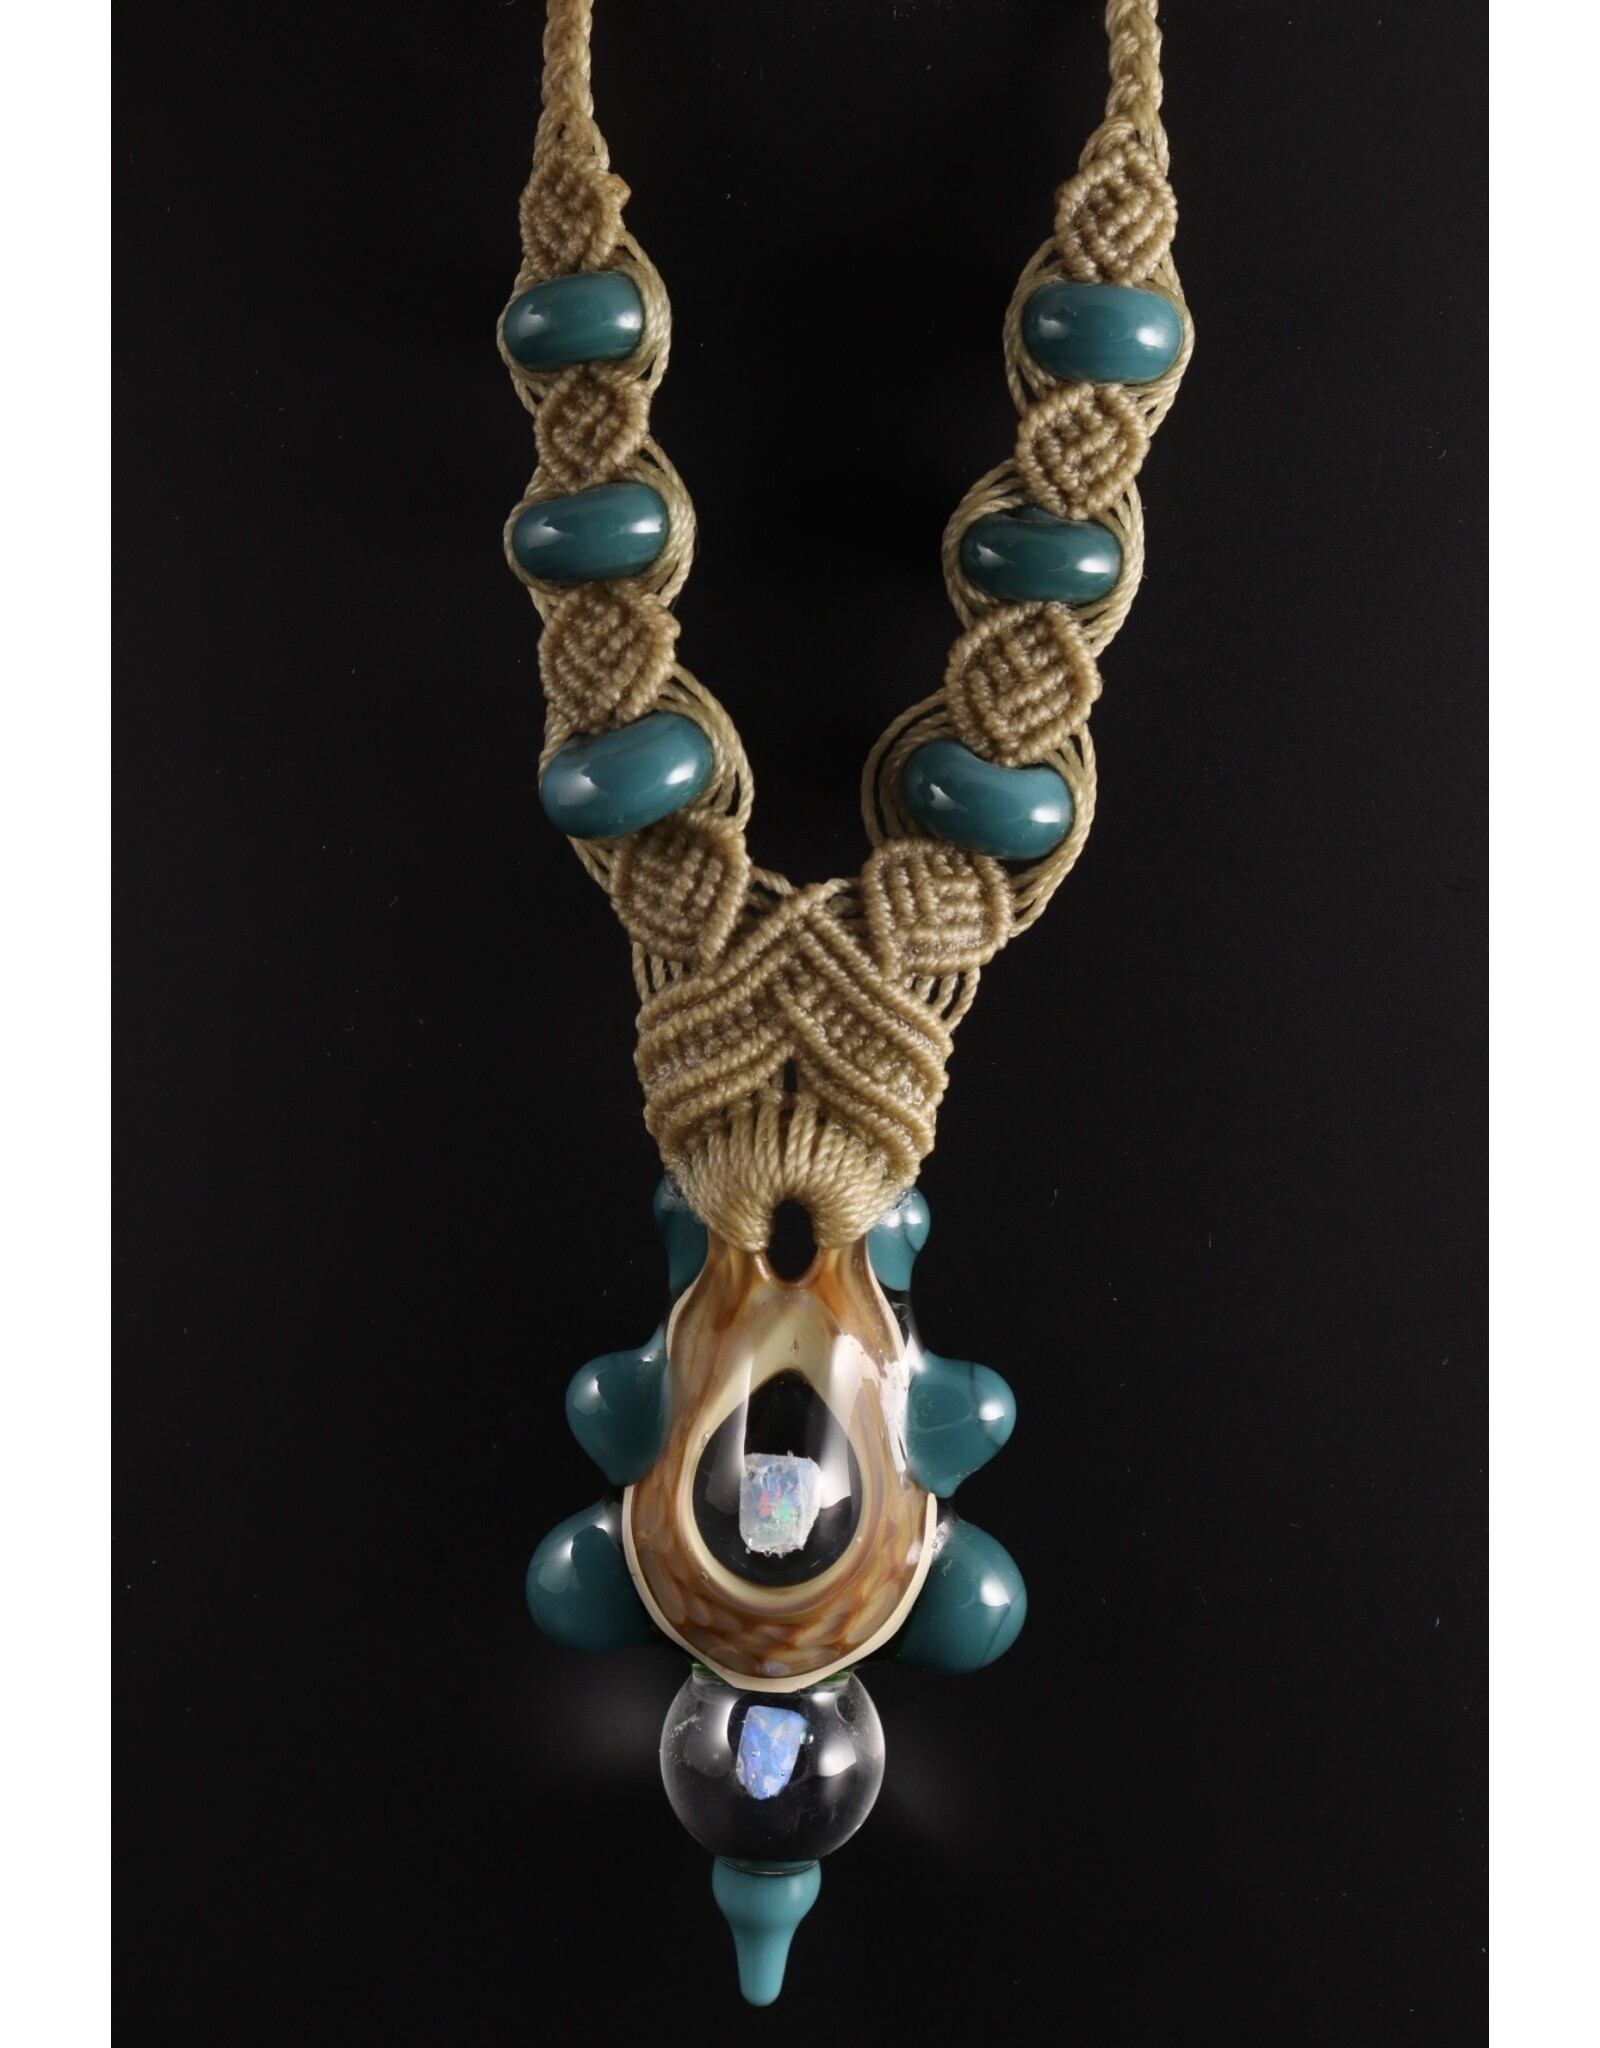 Woven Oapls and Beads Pendant